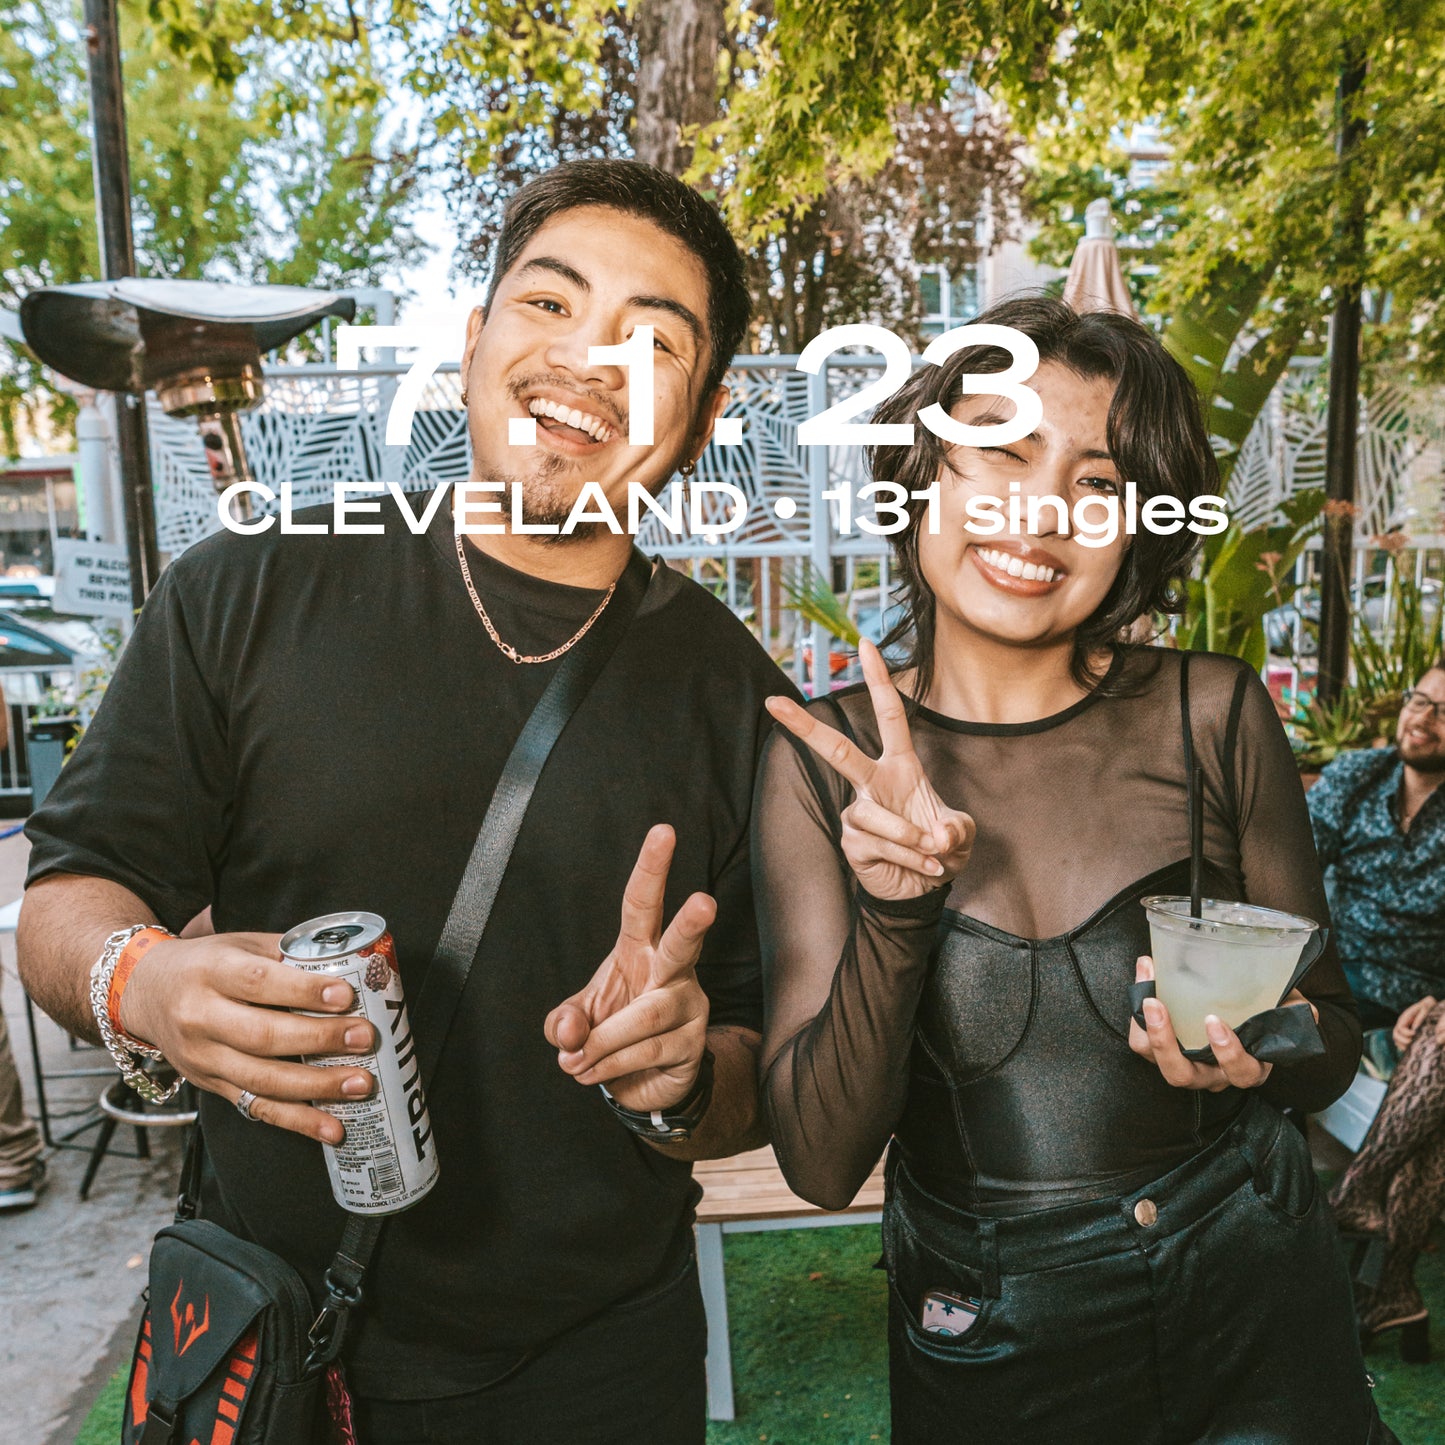 Cleveland: Singles Happy Hour